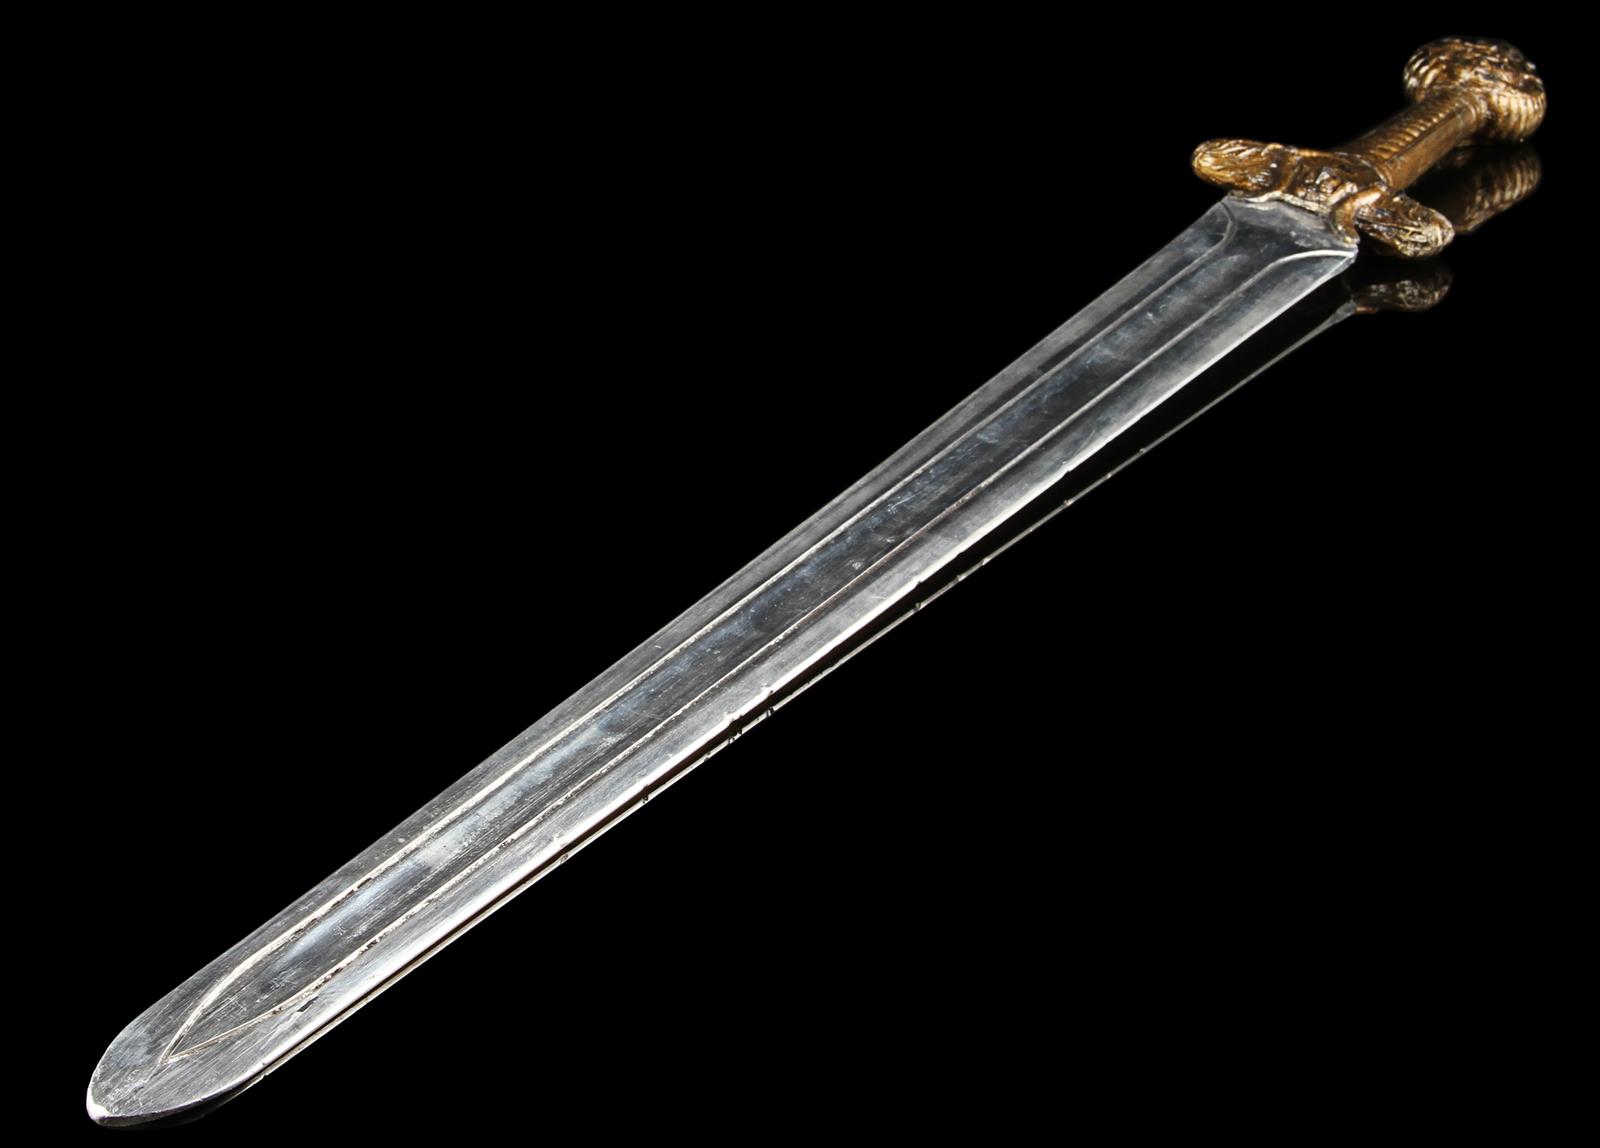 KING ARTHUR (2004) - Hero Excalibur Sword and Scabbard The fabled sword Excalibur from Antoine - Image 5 of 13